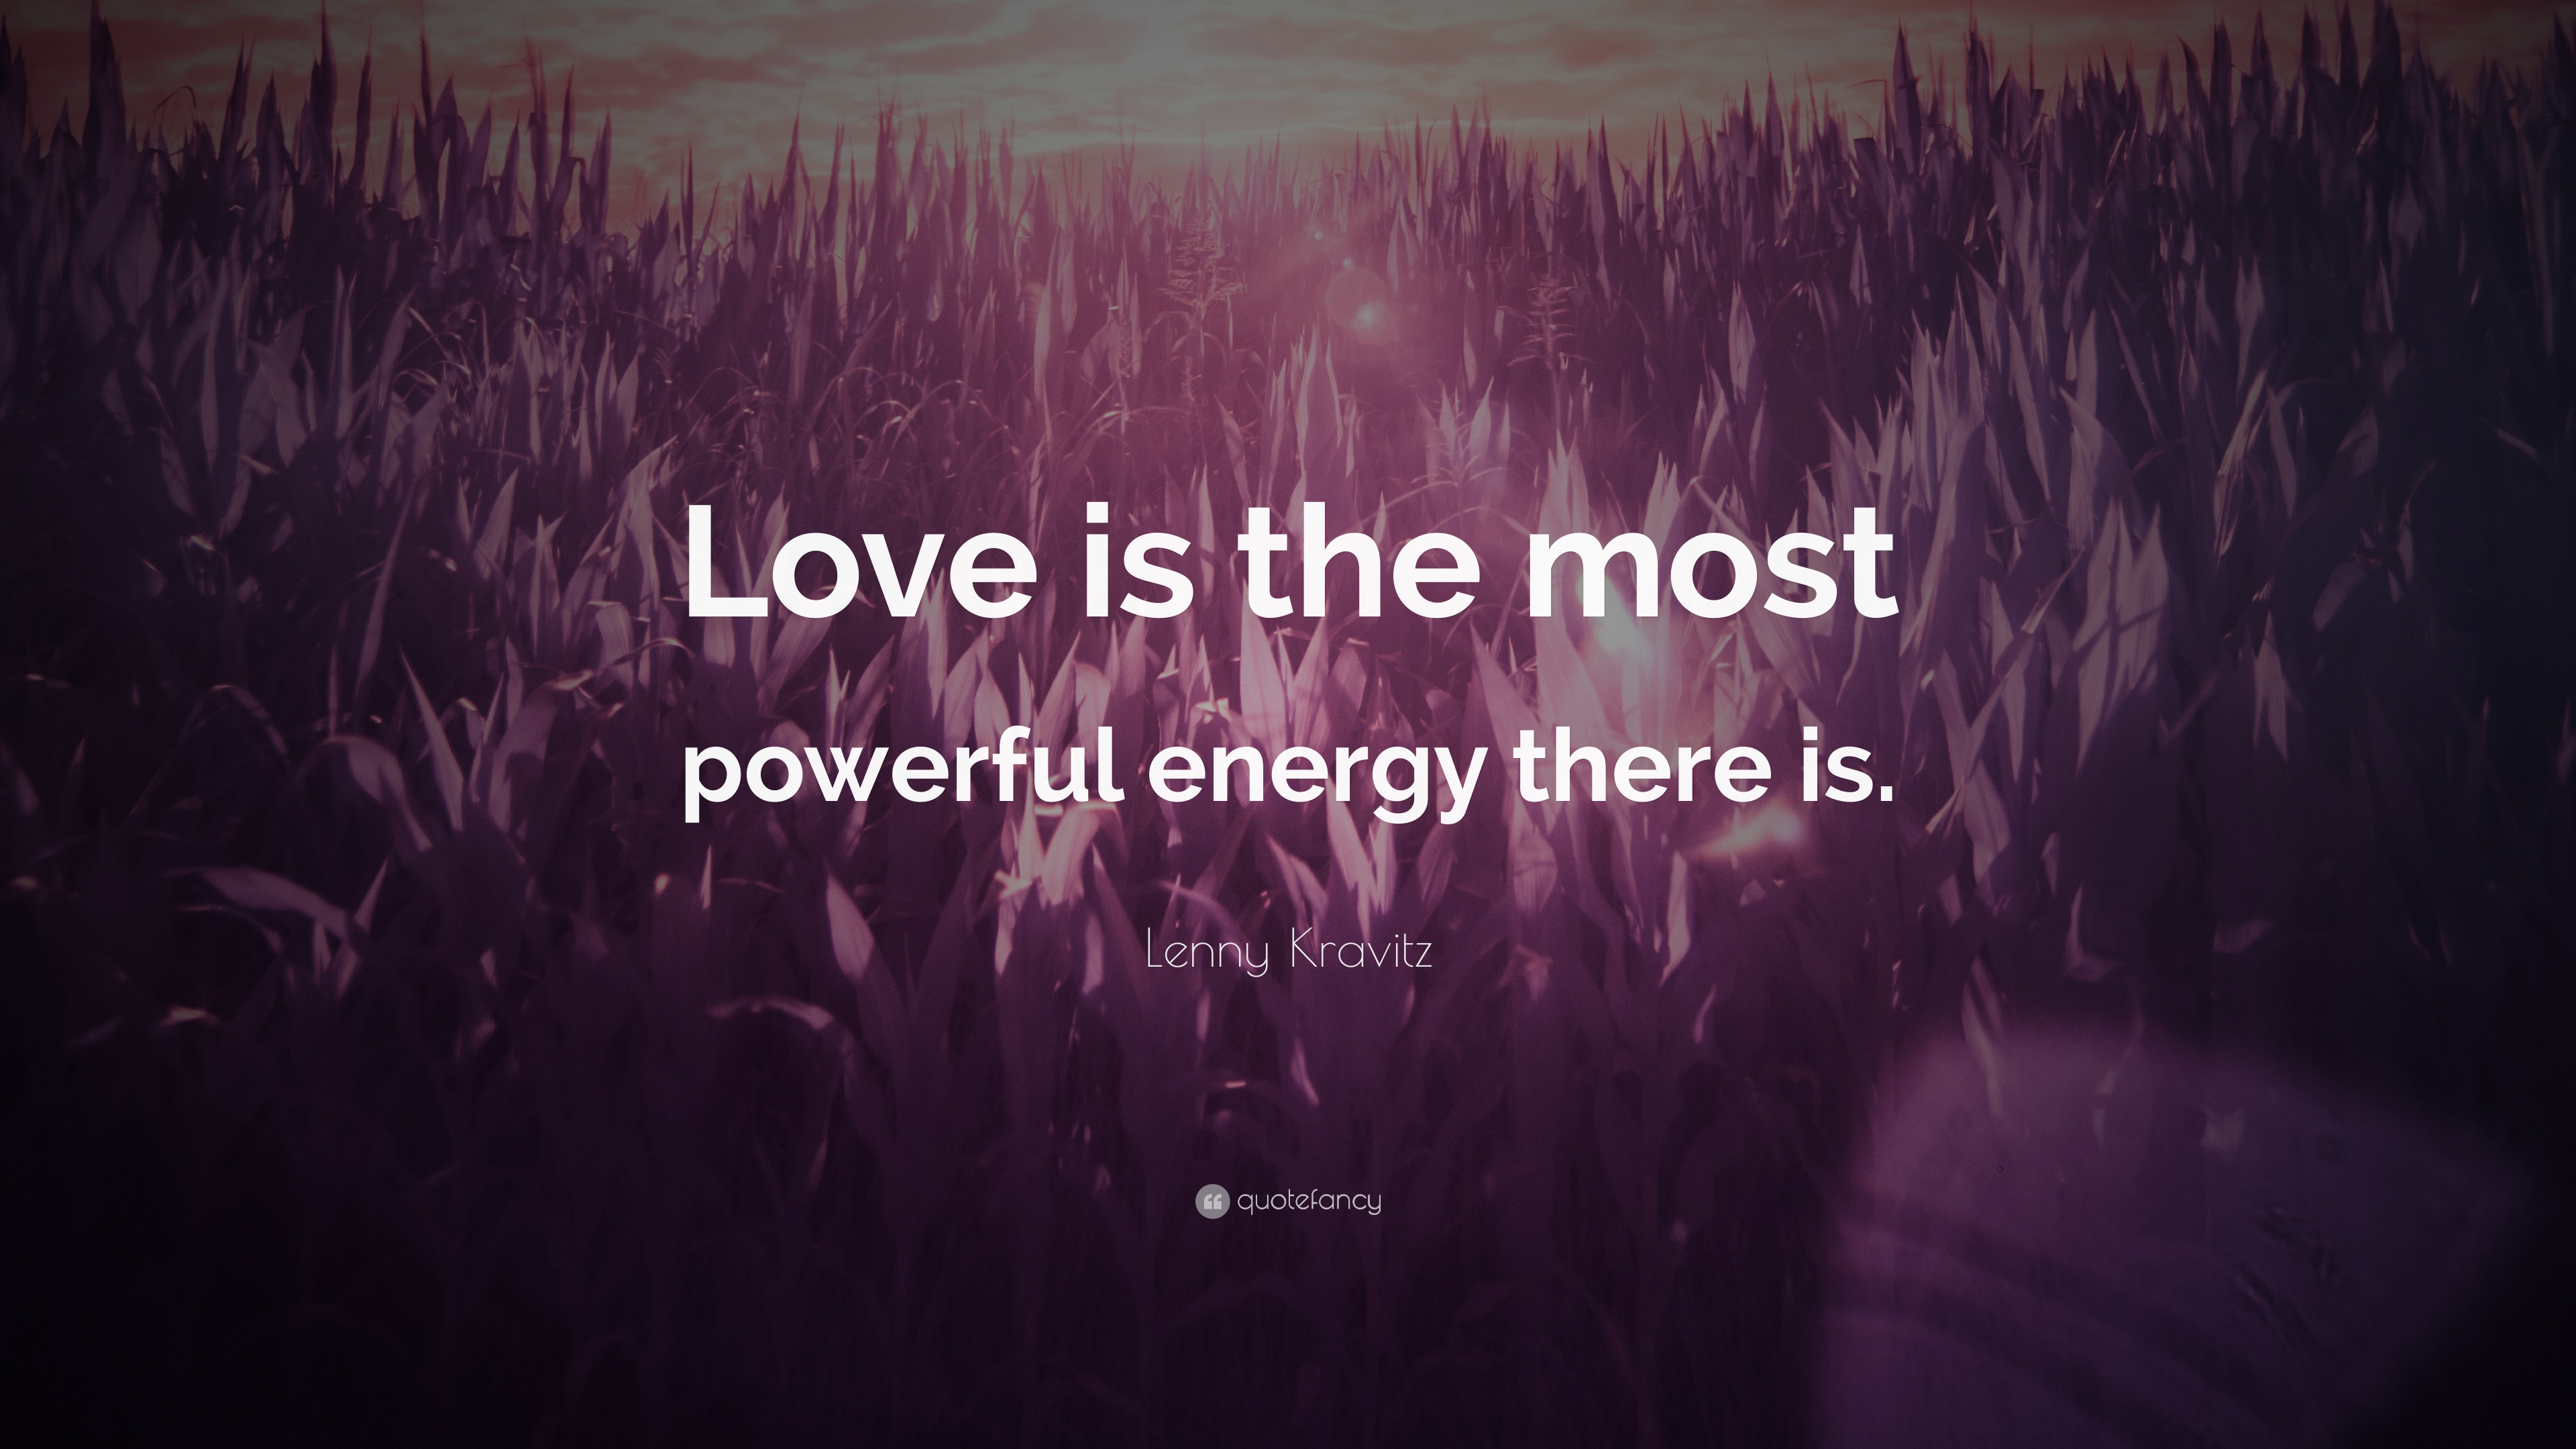 8 Lenny Kravitz Quotes About Love